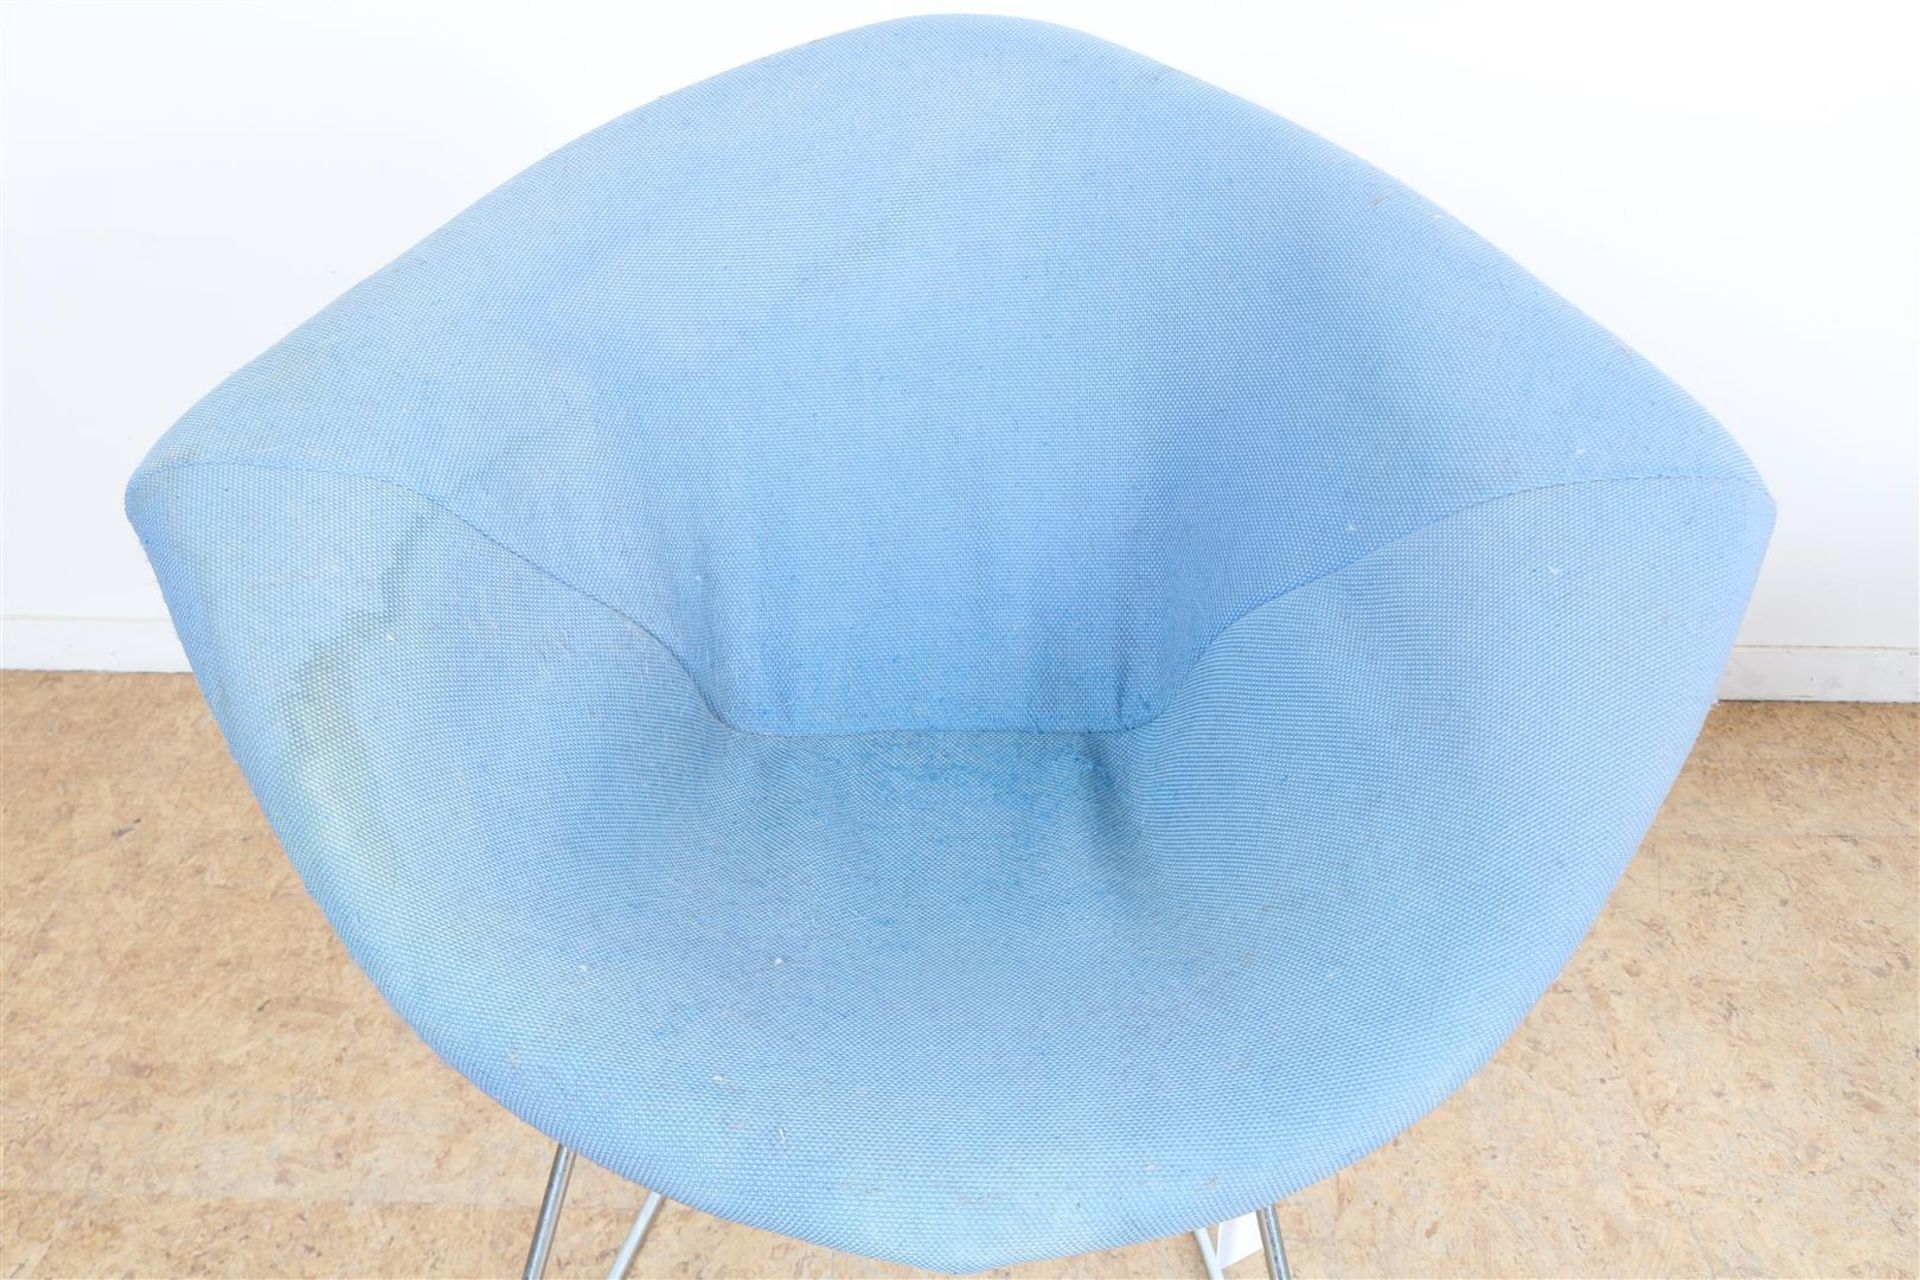 Set of wire steel design chairs with blue upholstery, designed in 1952 by Harry Bertoia for Knoll. - Image 5 of 5